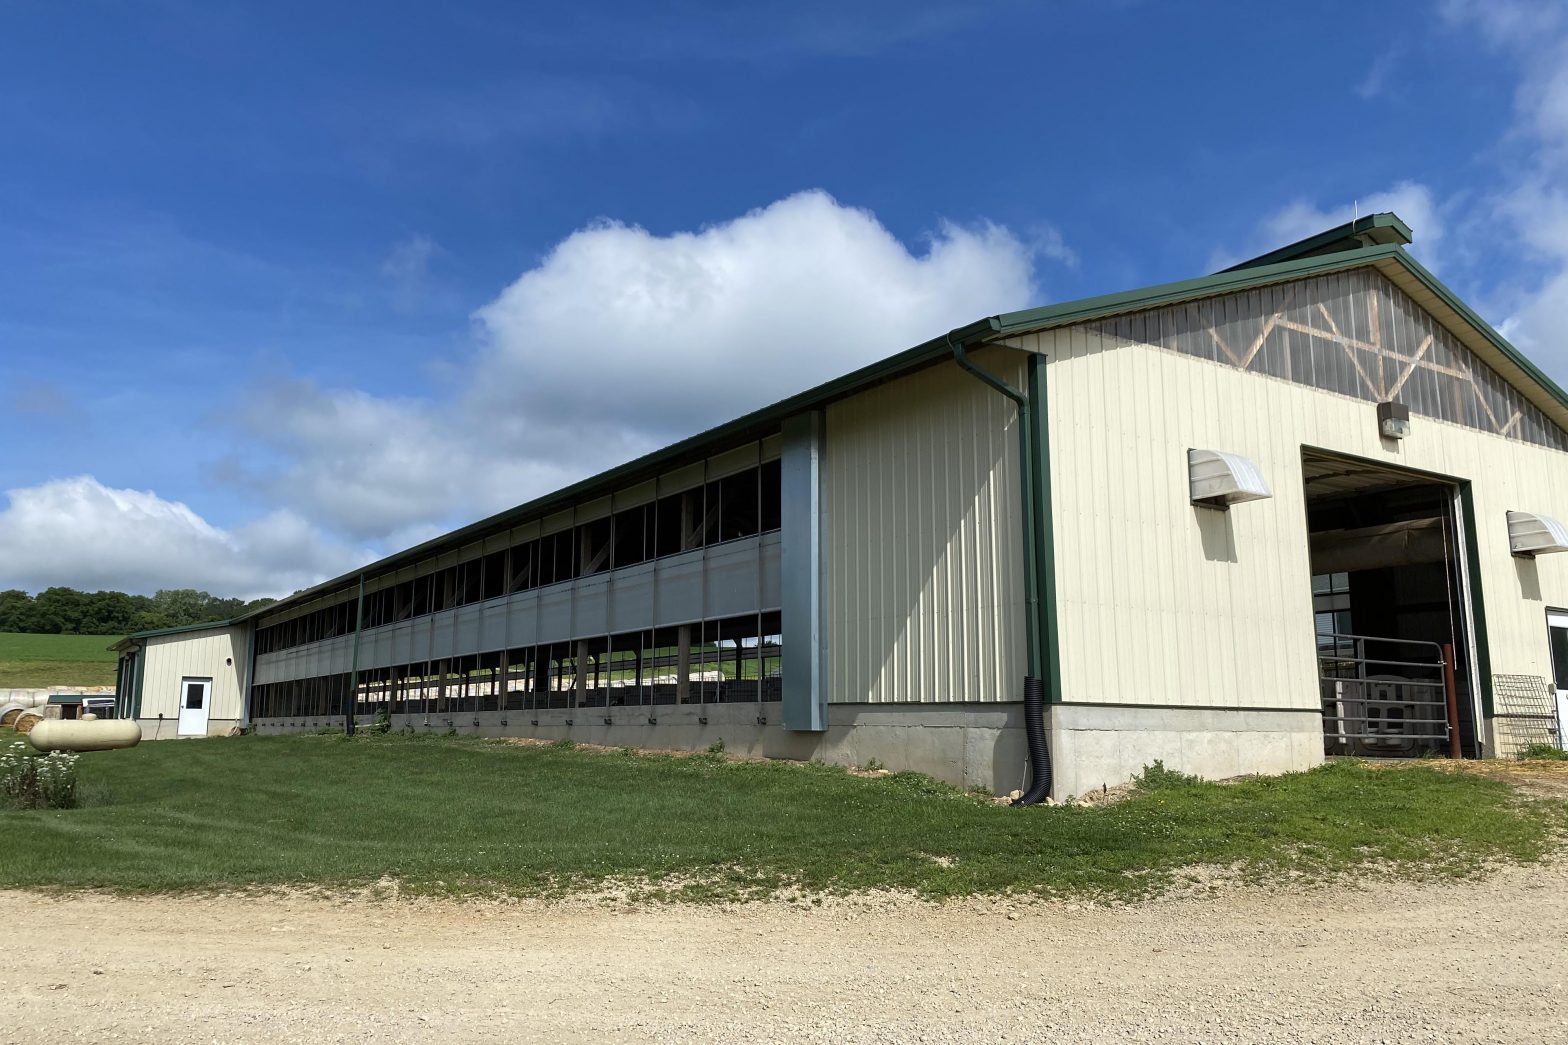 Cam-Cal-Kar Dairy Farm in Browntown, Wisconsin, is owned and operated by Craig and Katharine Edler.  Their daughter, Cali Schliem, manages the calves in addition to other farm responsibilities.